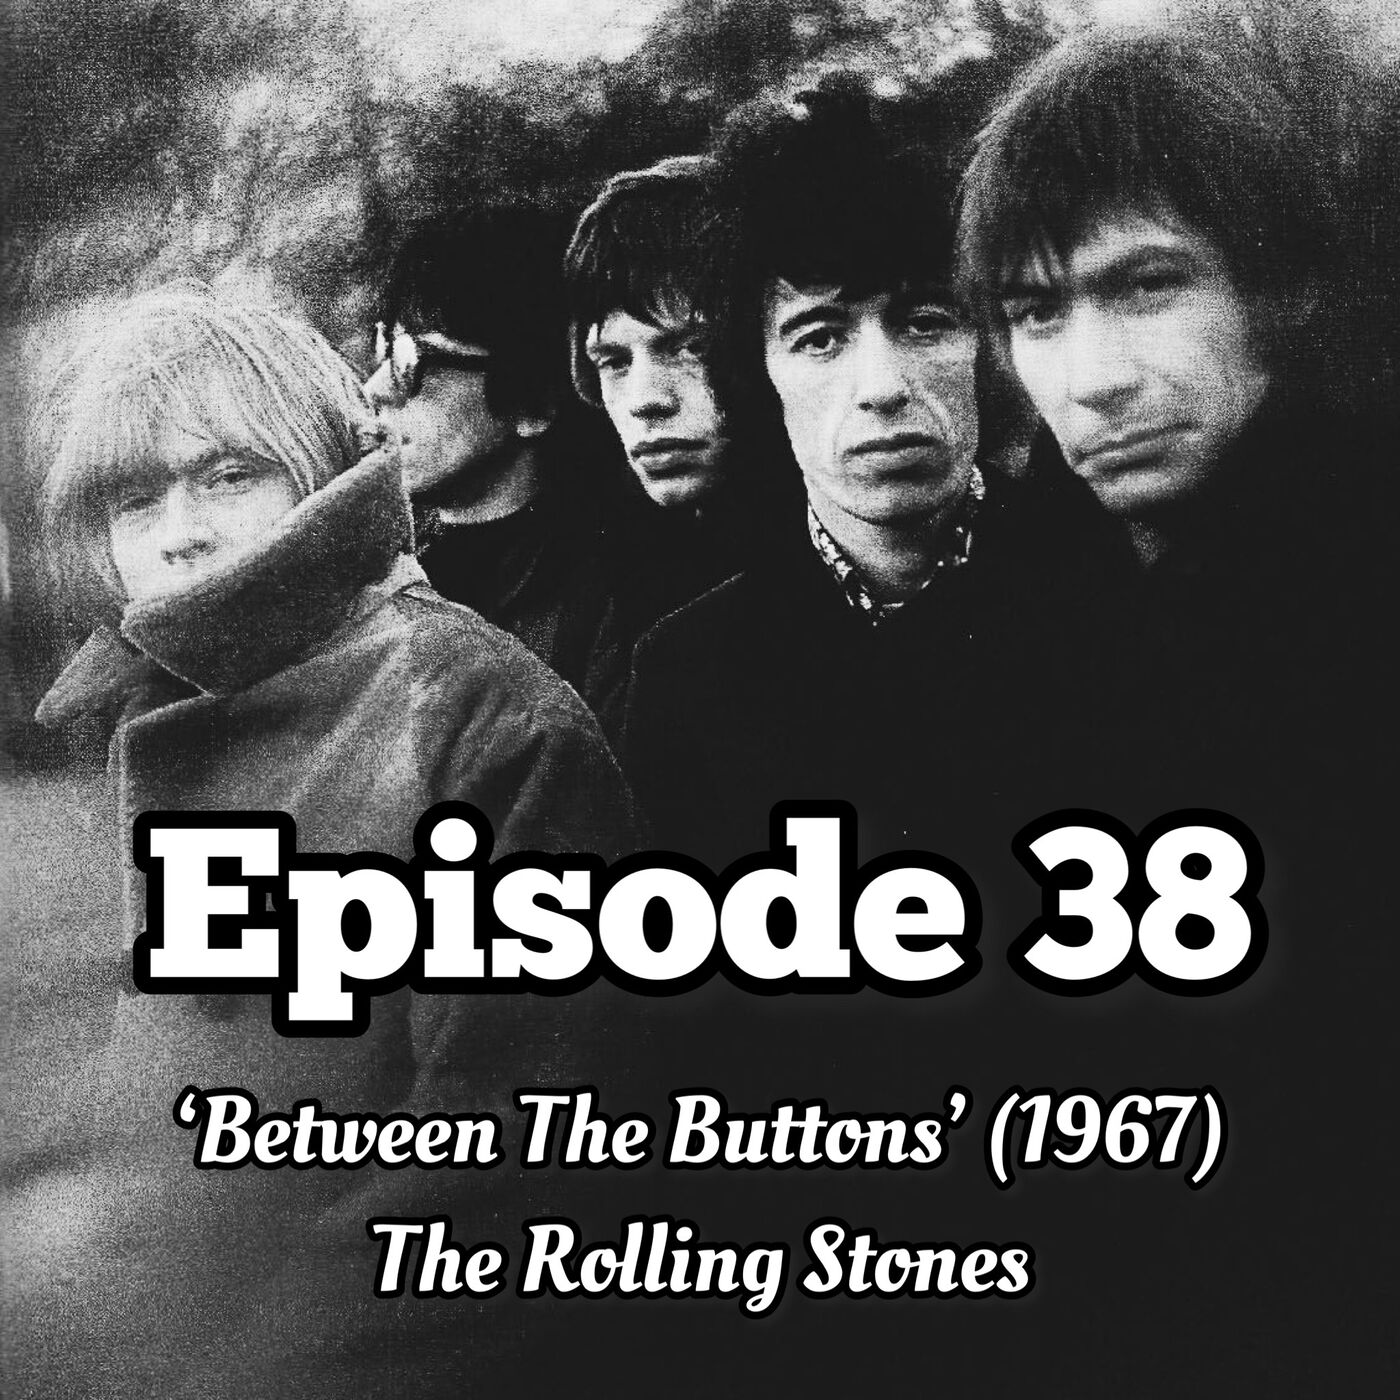 38. ’Between The Buttons’ - The Rolling Stones (1967)